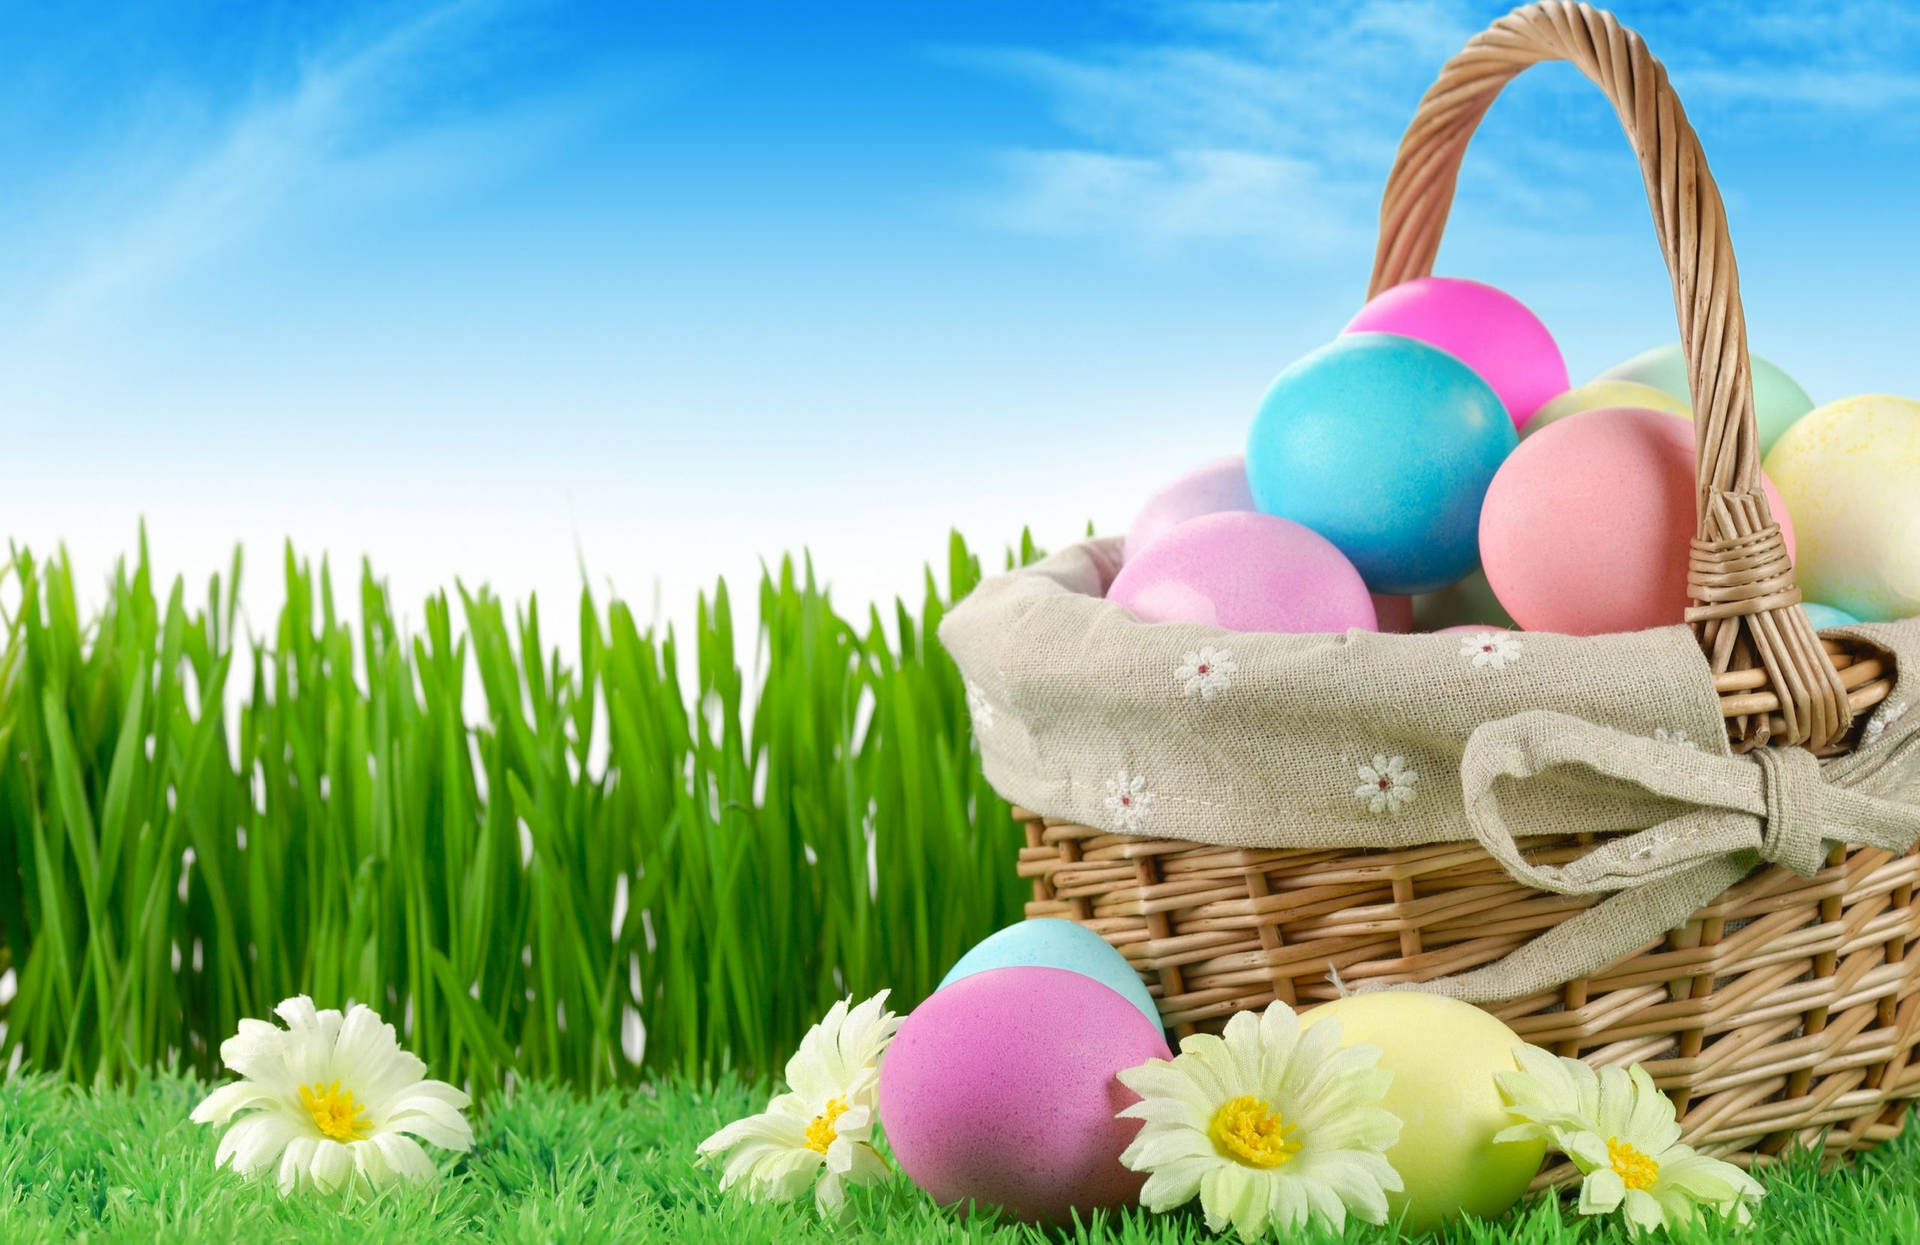 Happy Easter Eggs Basket On Sunny Day Wallpaper